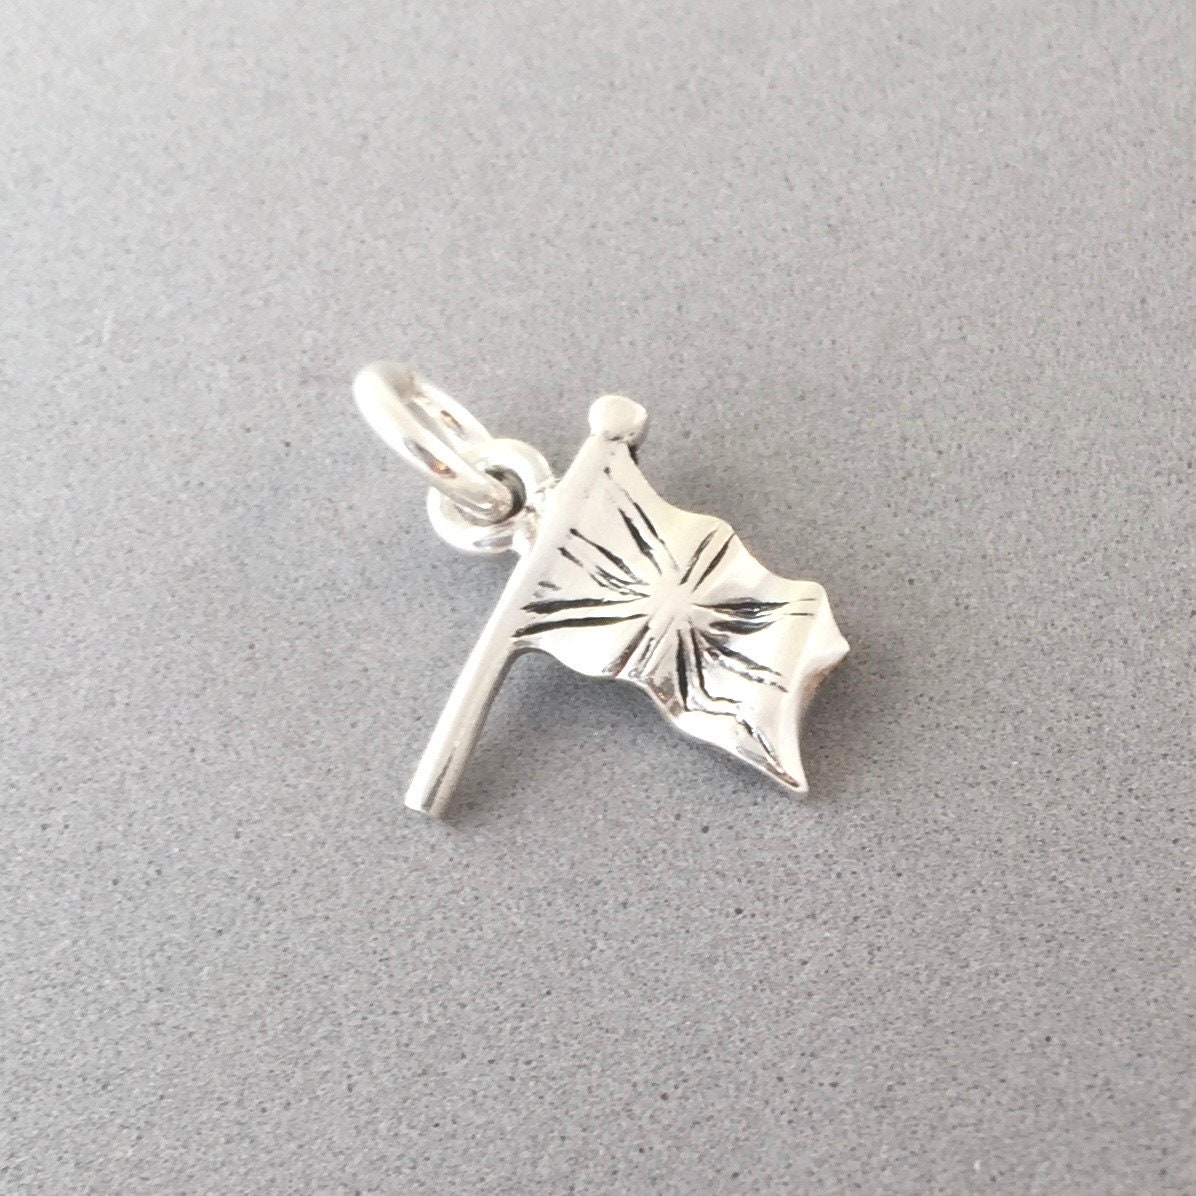 Details about   Union Jack sterling silver charm .925 x 1 British England Flags charms 